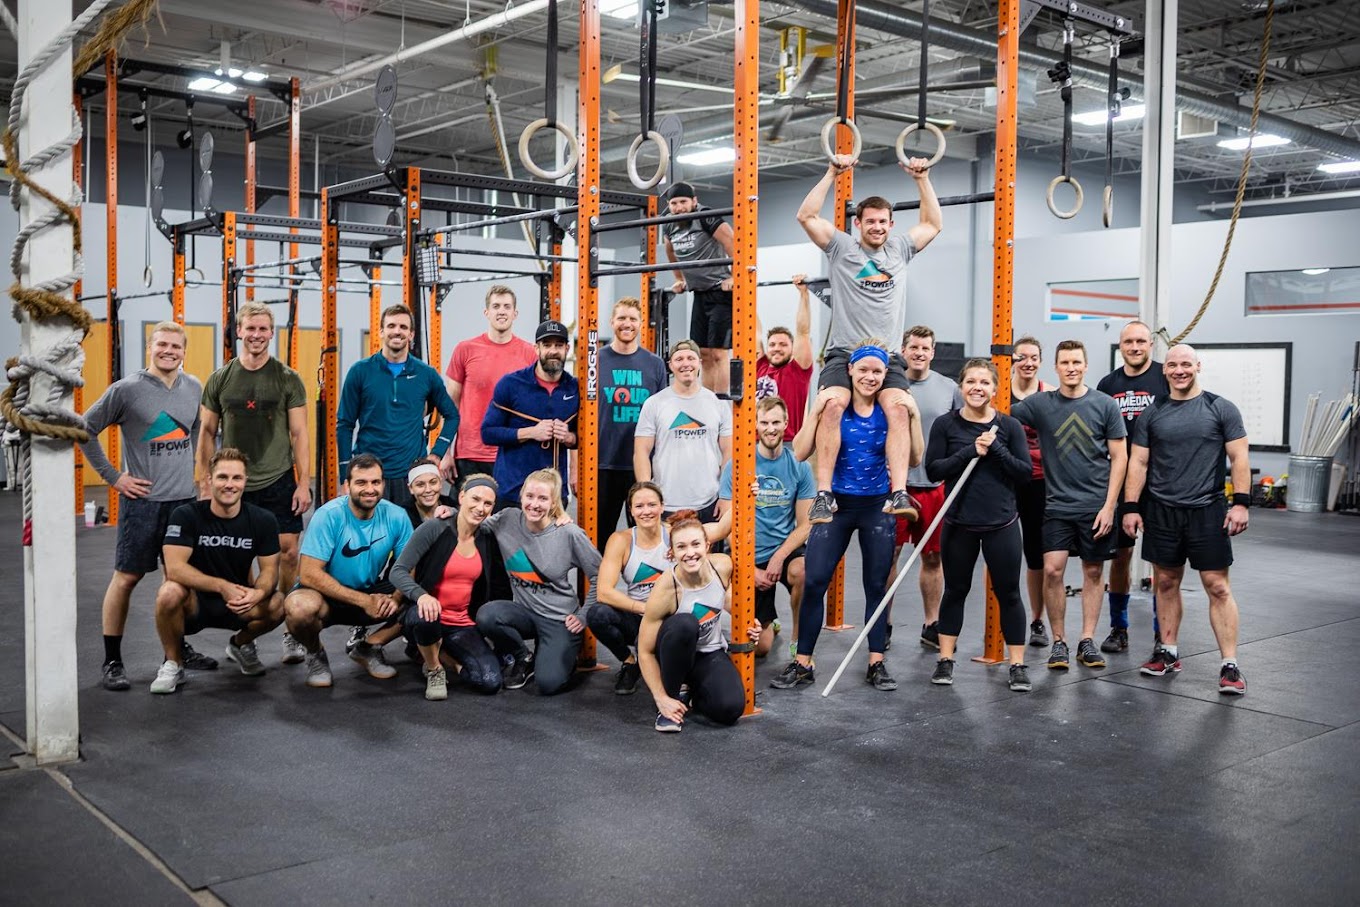 CrossFit community gym fitness class in St. Louis Park